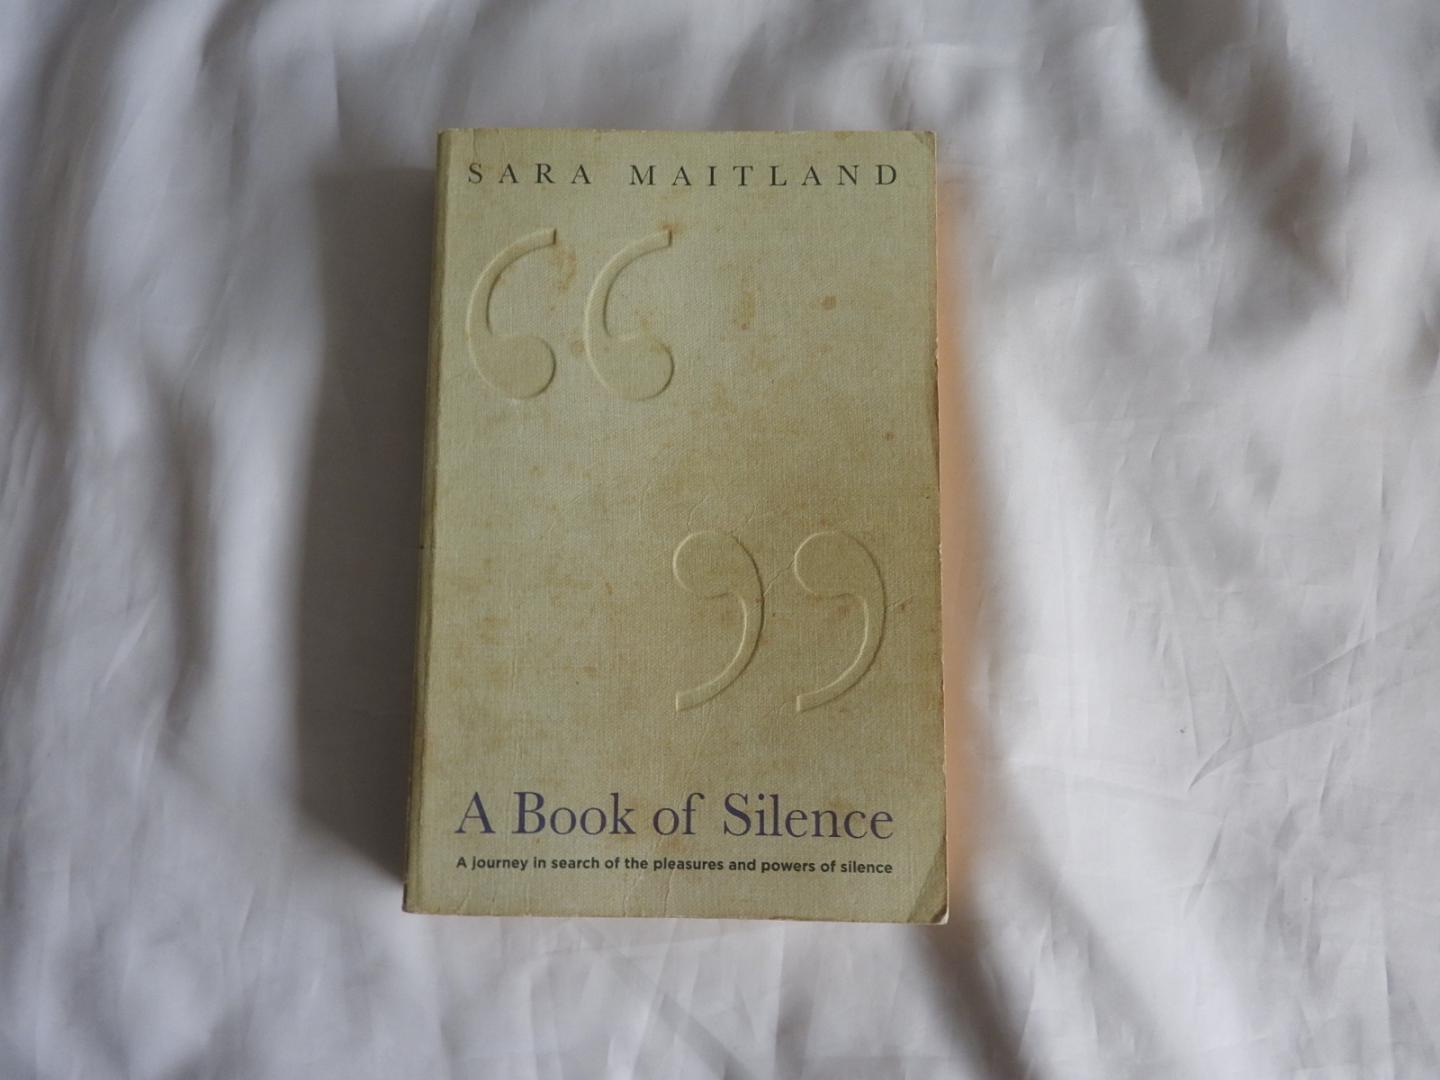 Maitland, Sara - A Book of Silence - A journey in search of the pleasures and powers of silence